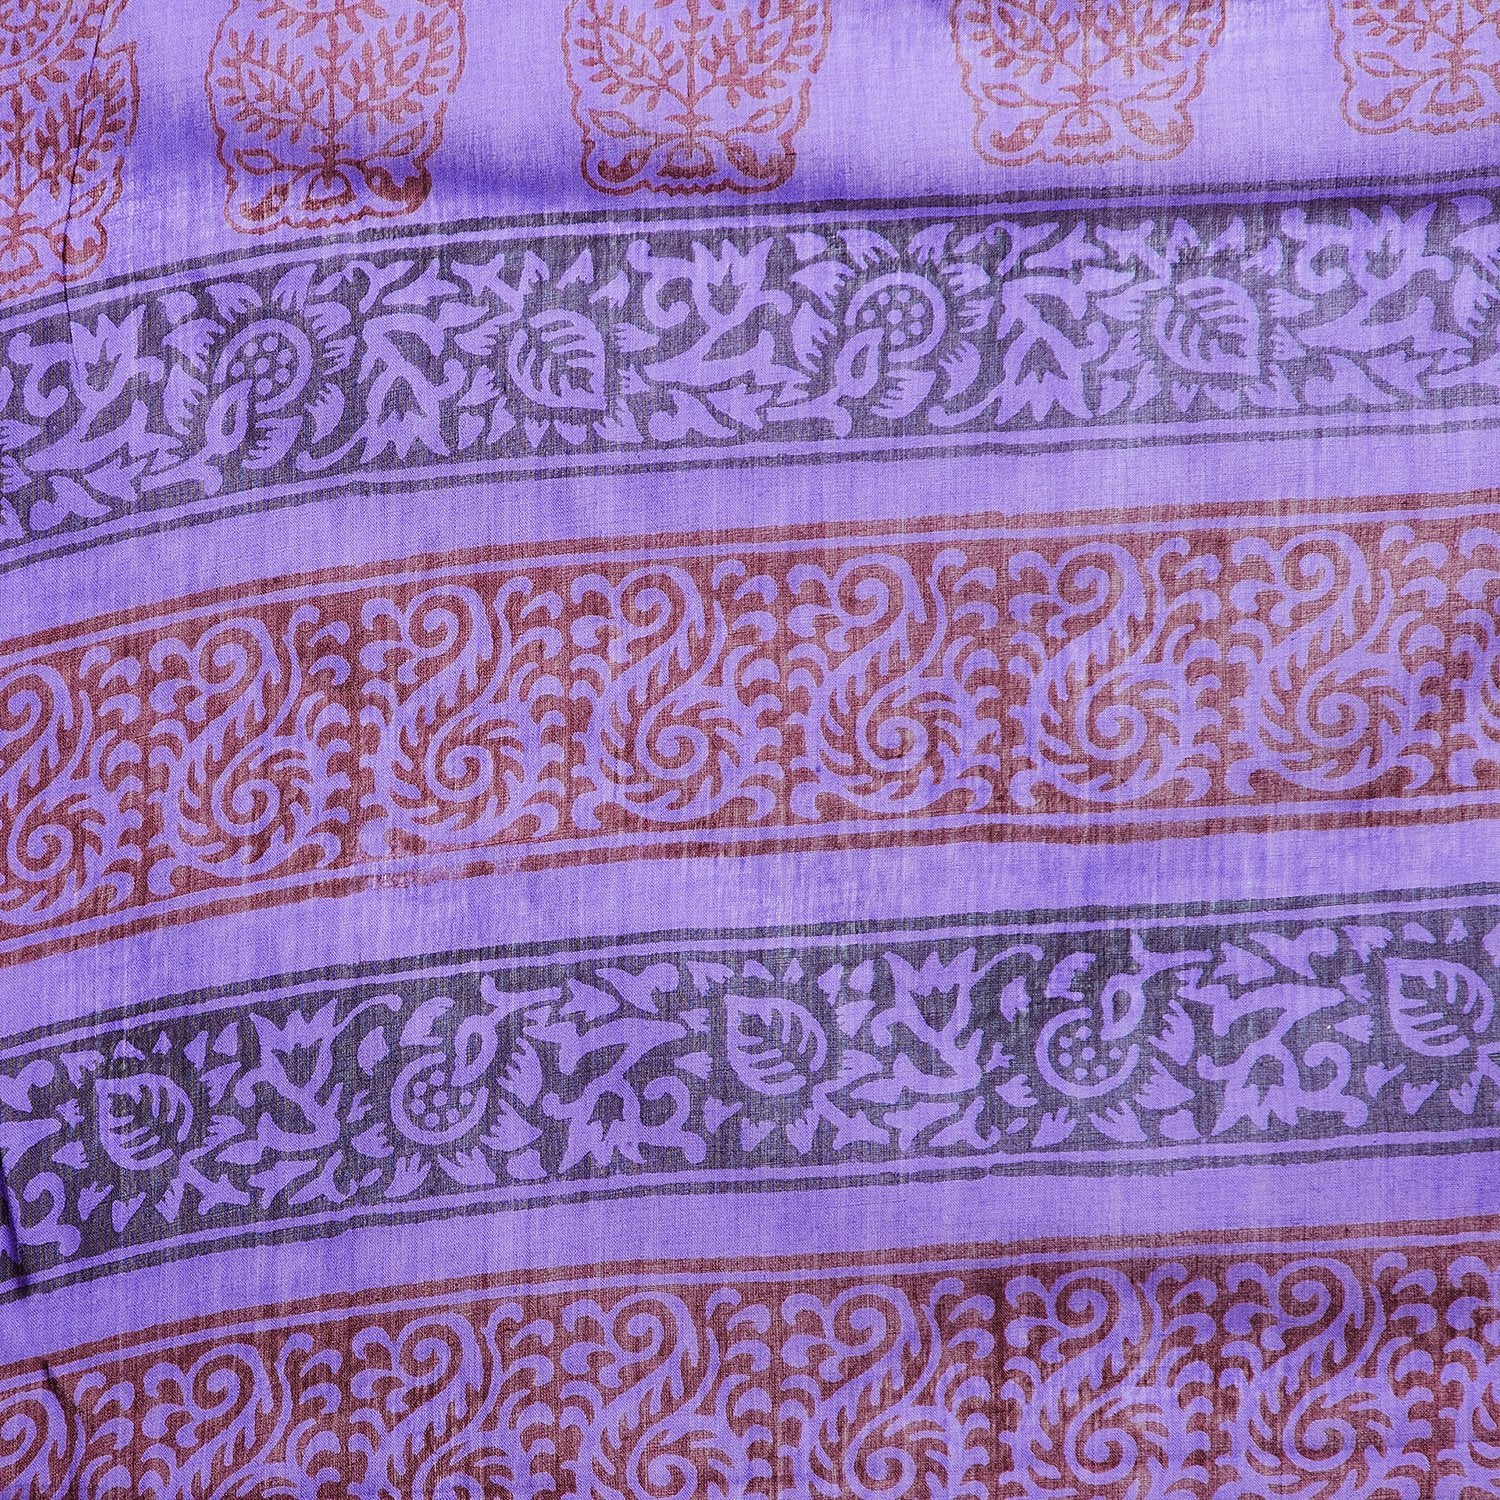 Purple & Red Cotton Bagh Hand Block Print Handcrafted Cotton Saree-Saree-Kalakari India-BAPASA0058-Bagh, Cotton, Geographical Indication, Hand Blocks, Hand Crafted, Heritage Prints, Sarees, Sustainable Fabrics-[Linen,Ethnic,wear,Fashionista,Handloom,Handicraft,Indigo,blockprint,block,print,Cotton,Chanderi,Blue, latest,classy,party,bollywood,trendy,summer,style,traditional,formal,elegant,unique,style,hand,block,print, dabu,booti,gift,present,glamorous,affordable,collectible,Sari,Saree,printed, ho